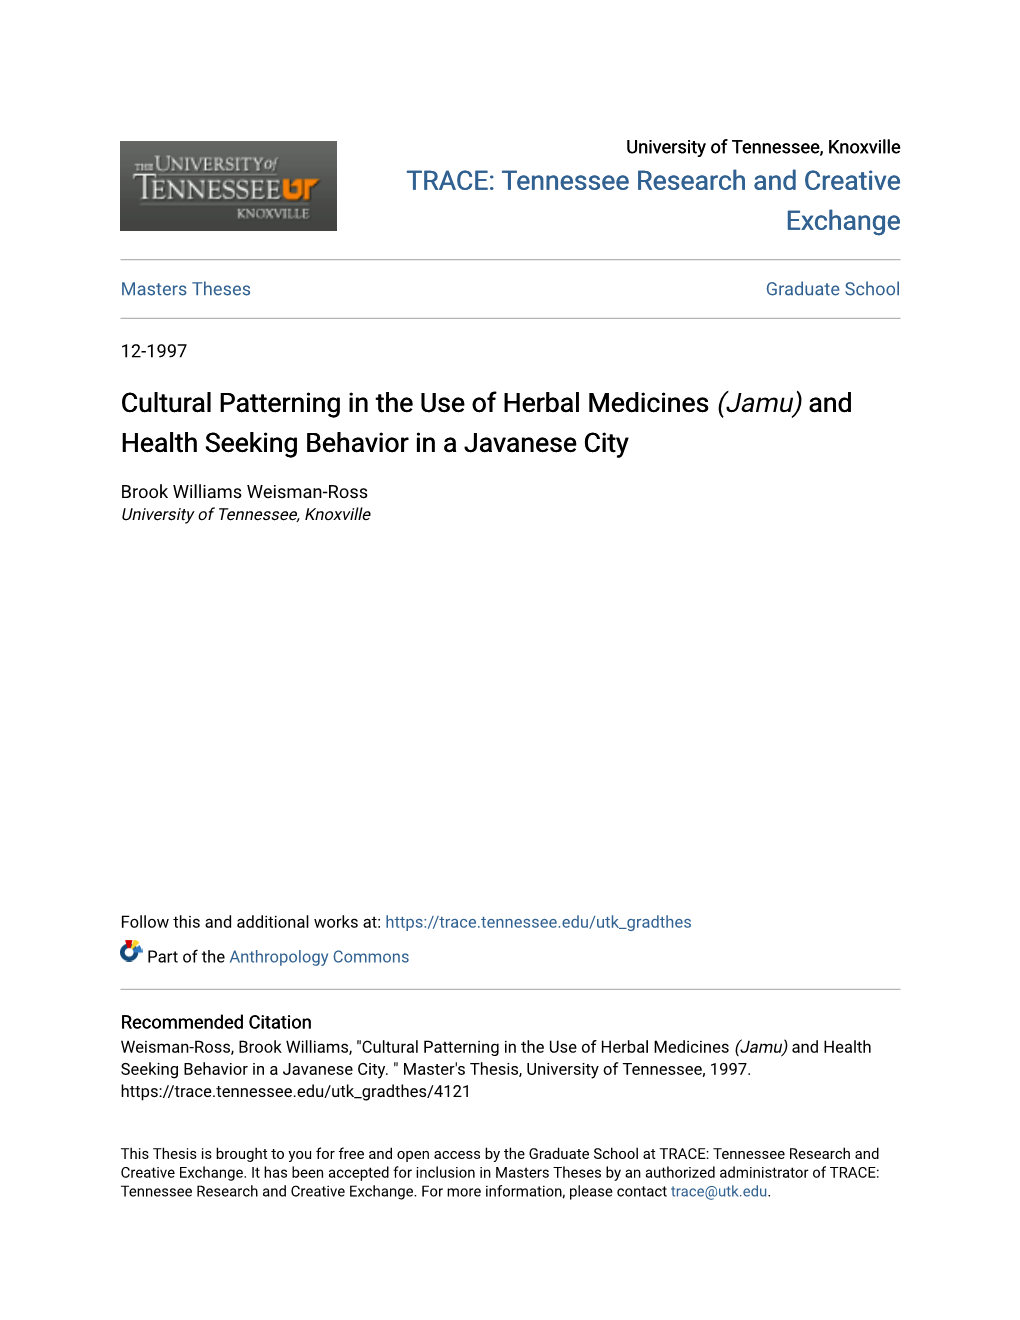 Cultural Patterning in the Use of Herbal Medicines (Jamu) and Health Seeking Behavior in a Javanese City